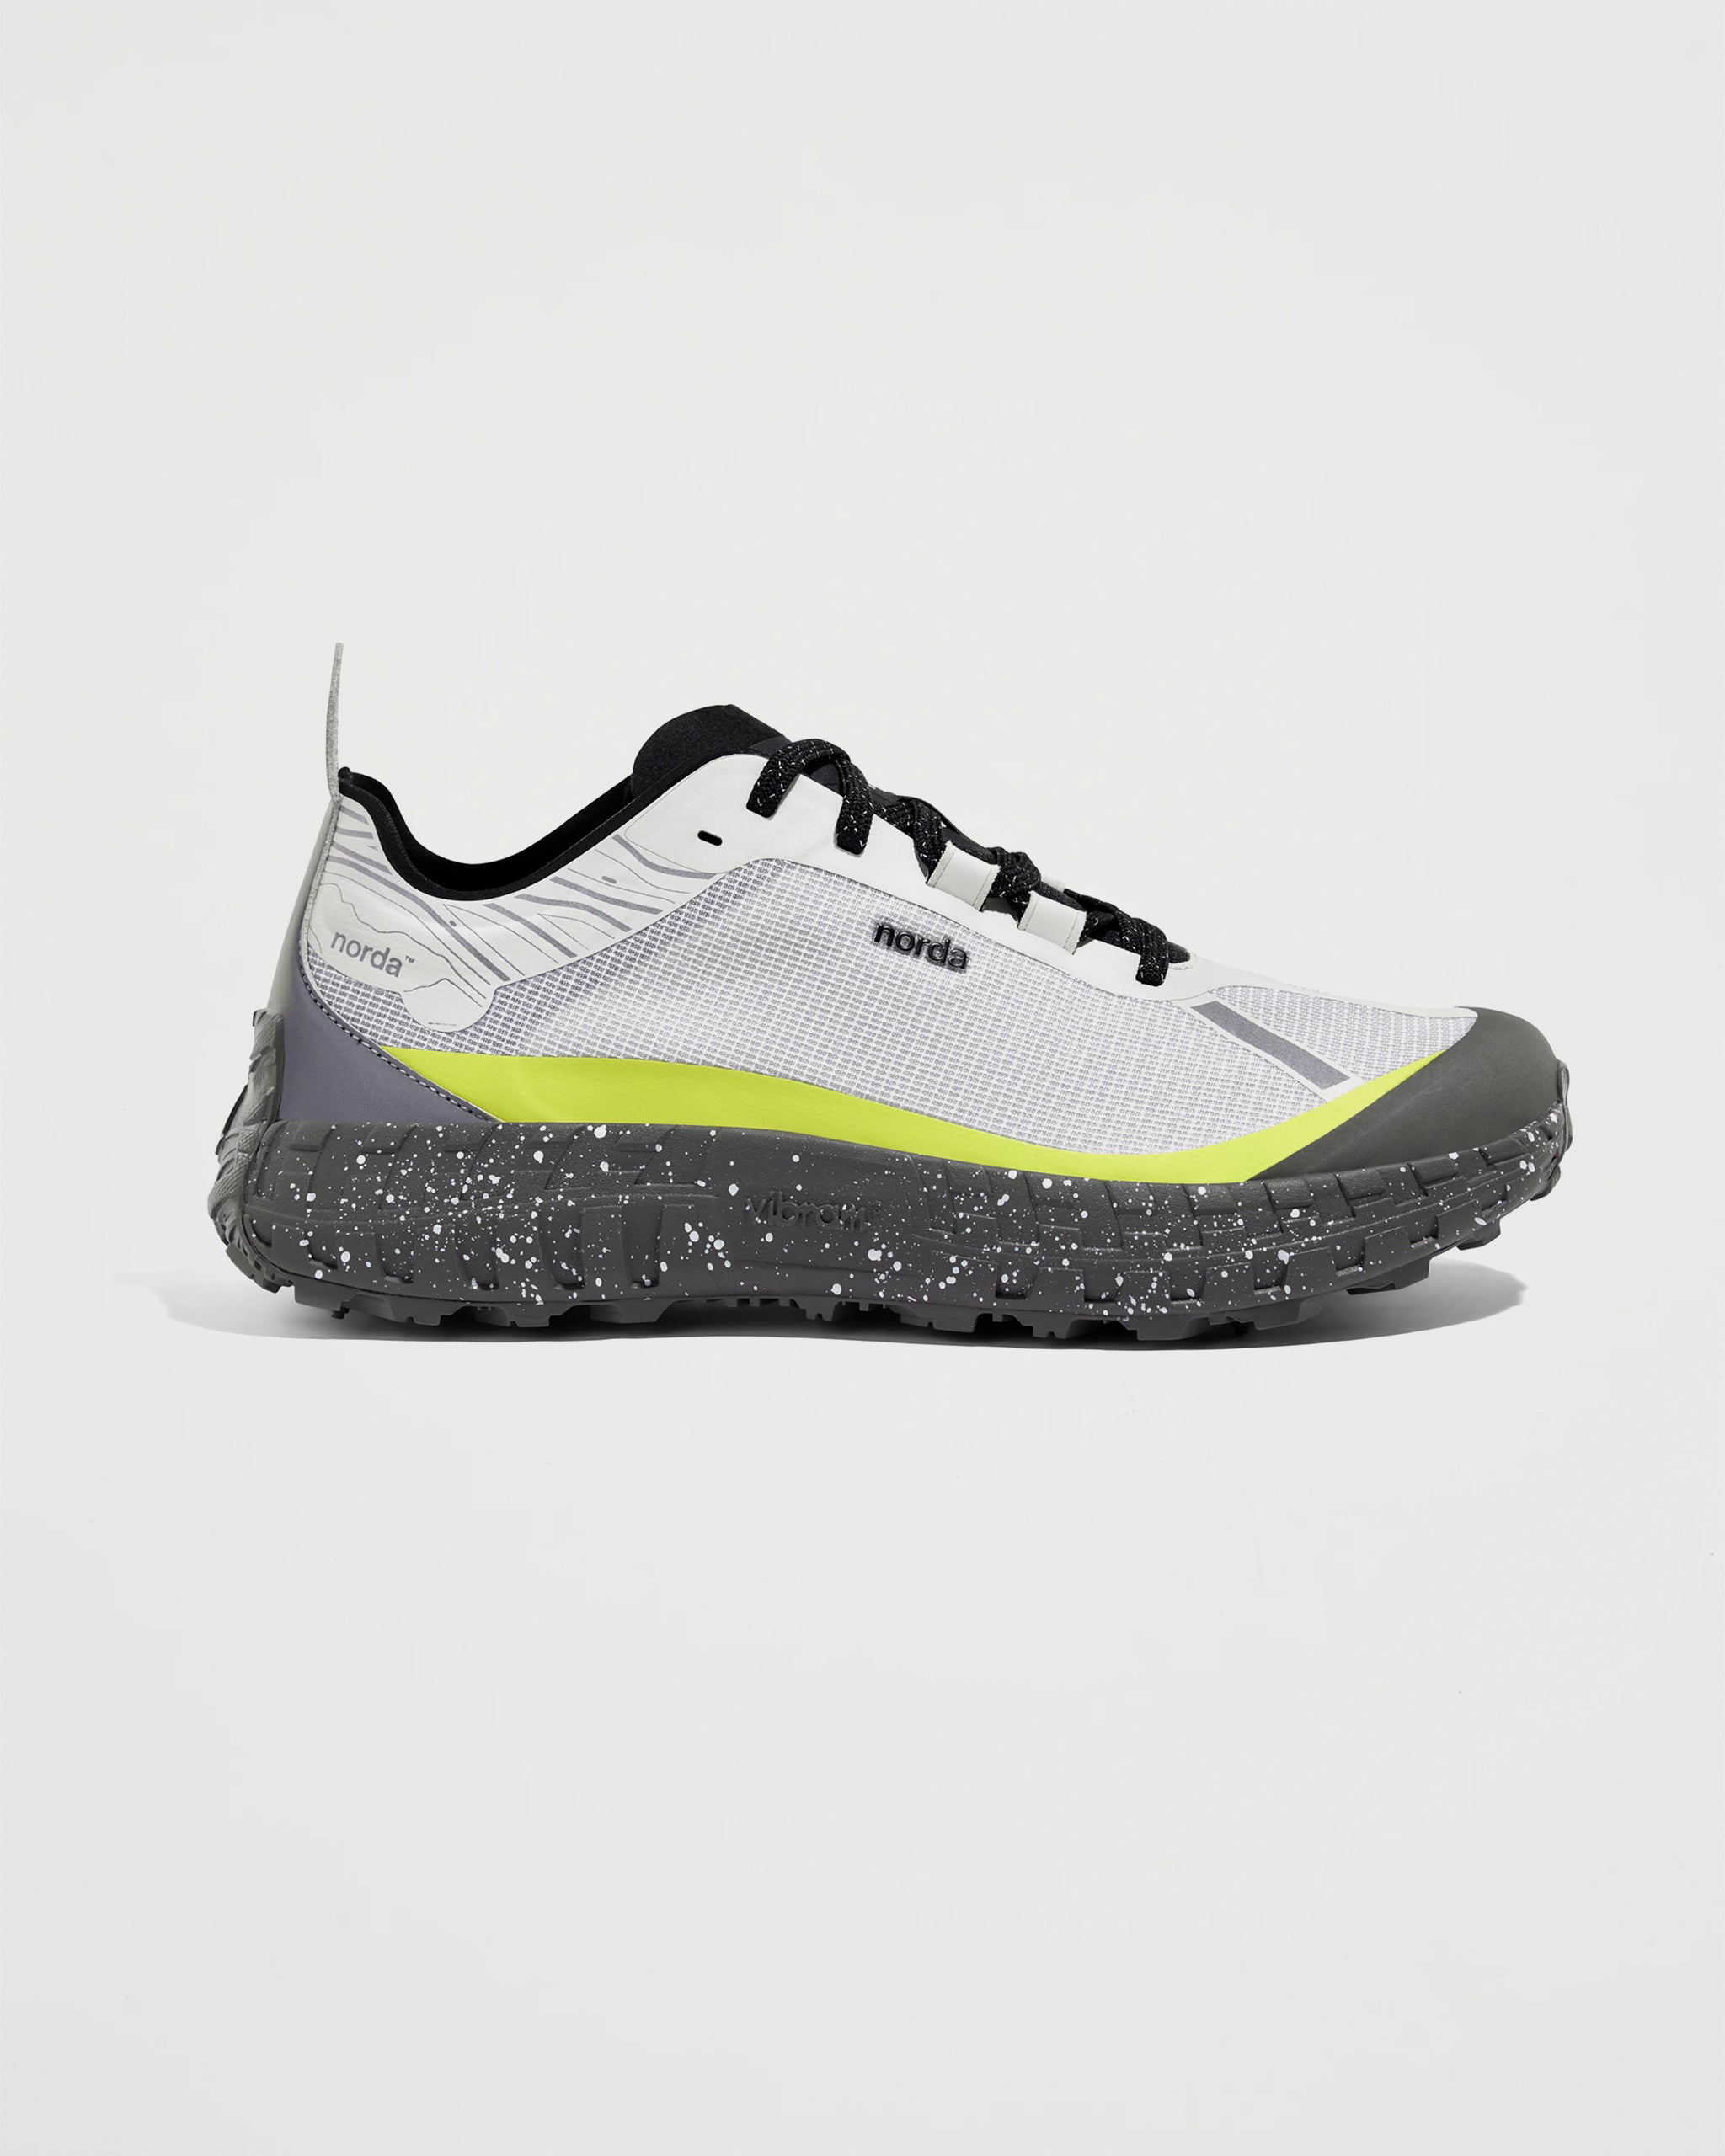 Norda Run 001 Limited Edition Icicle Shoes Sneakers Men